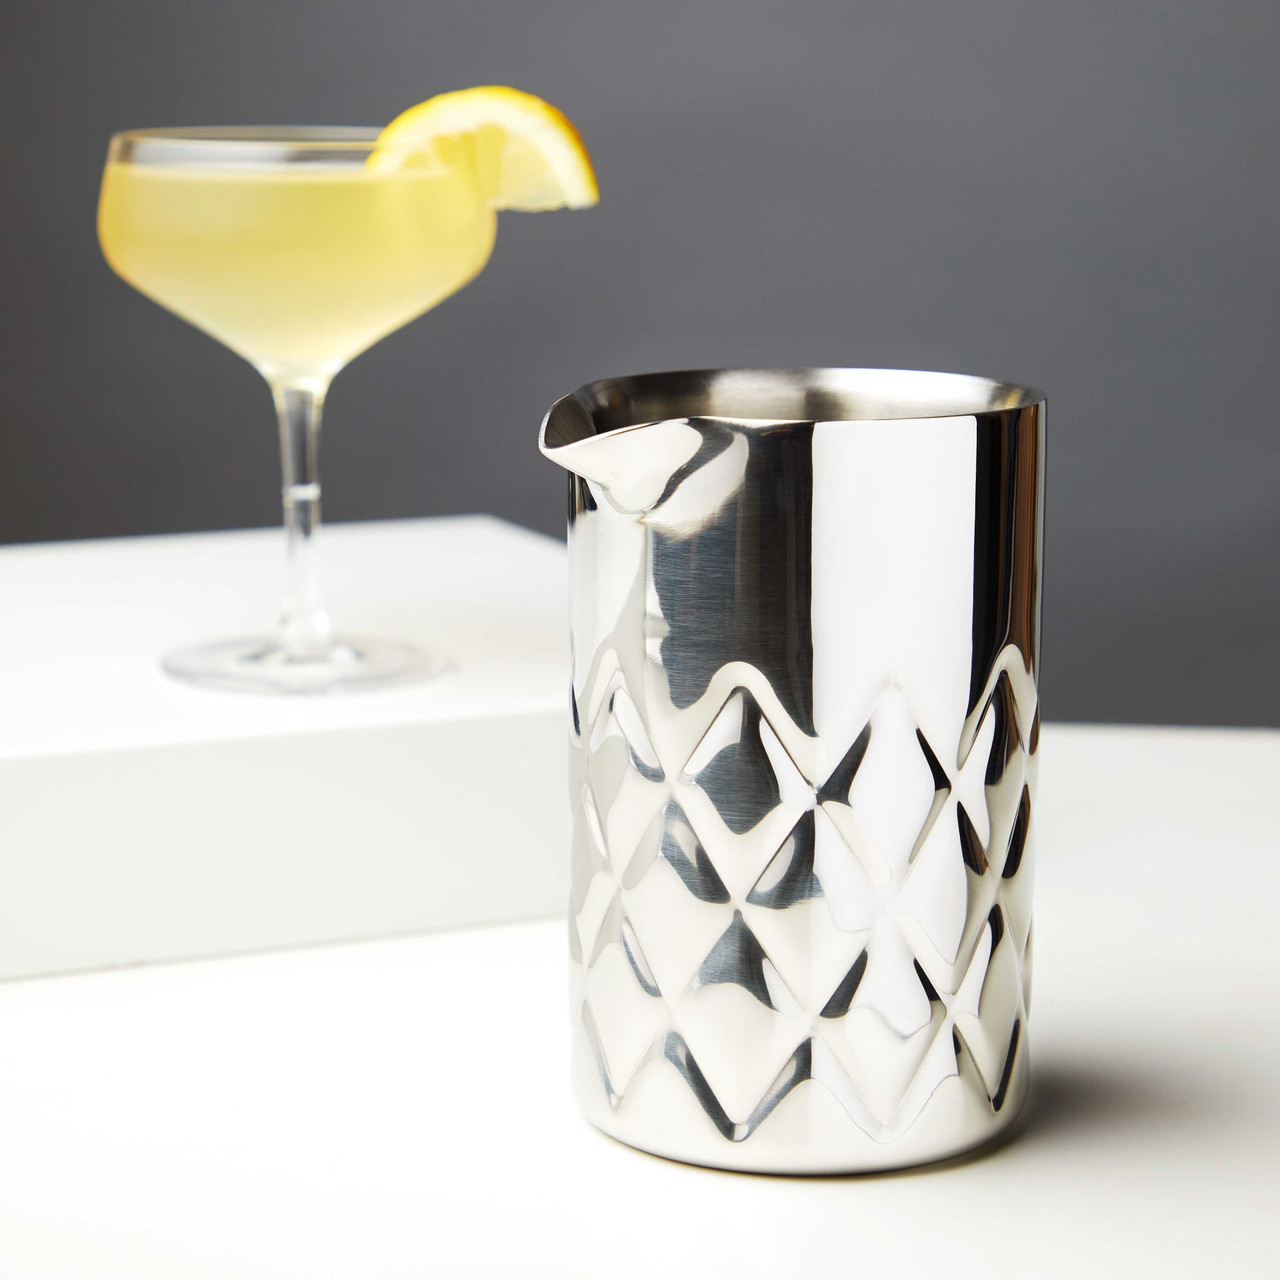 Double-Walled Mixing Glass by Viski